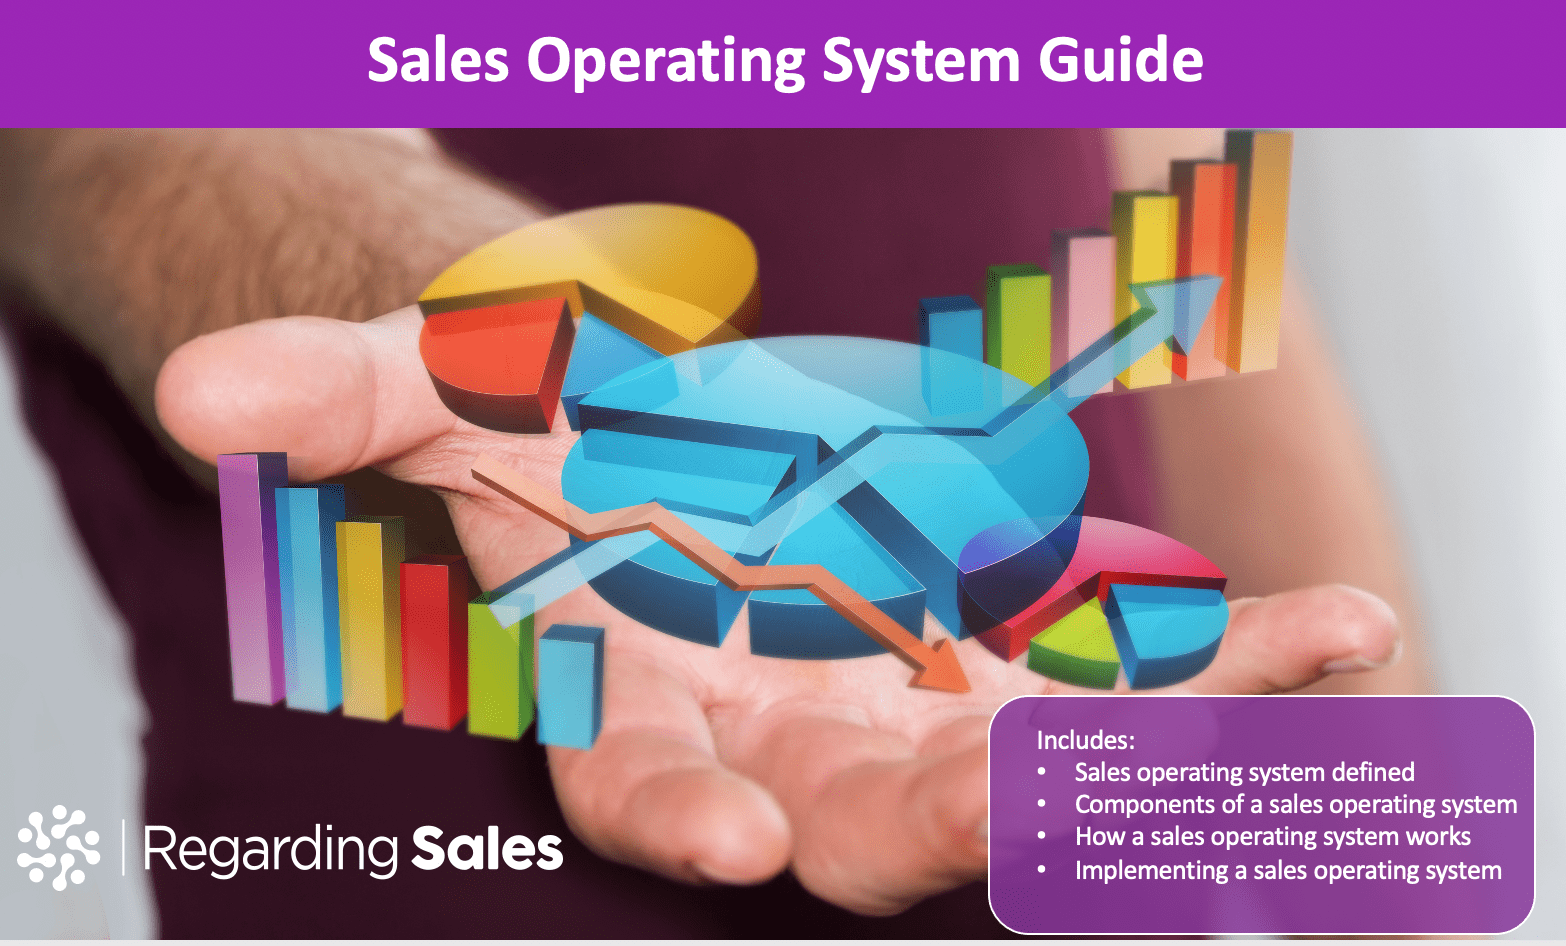 Sales Operating System Image